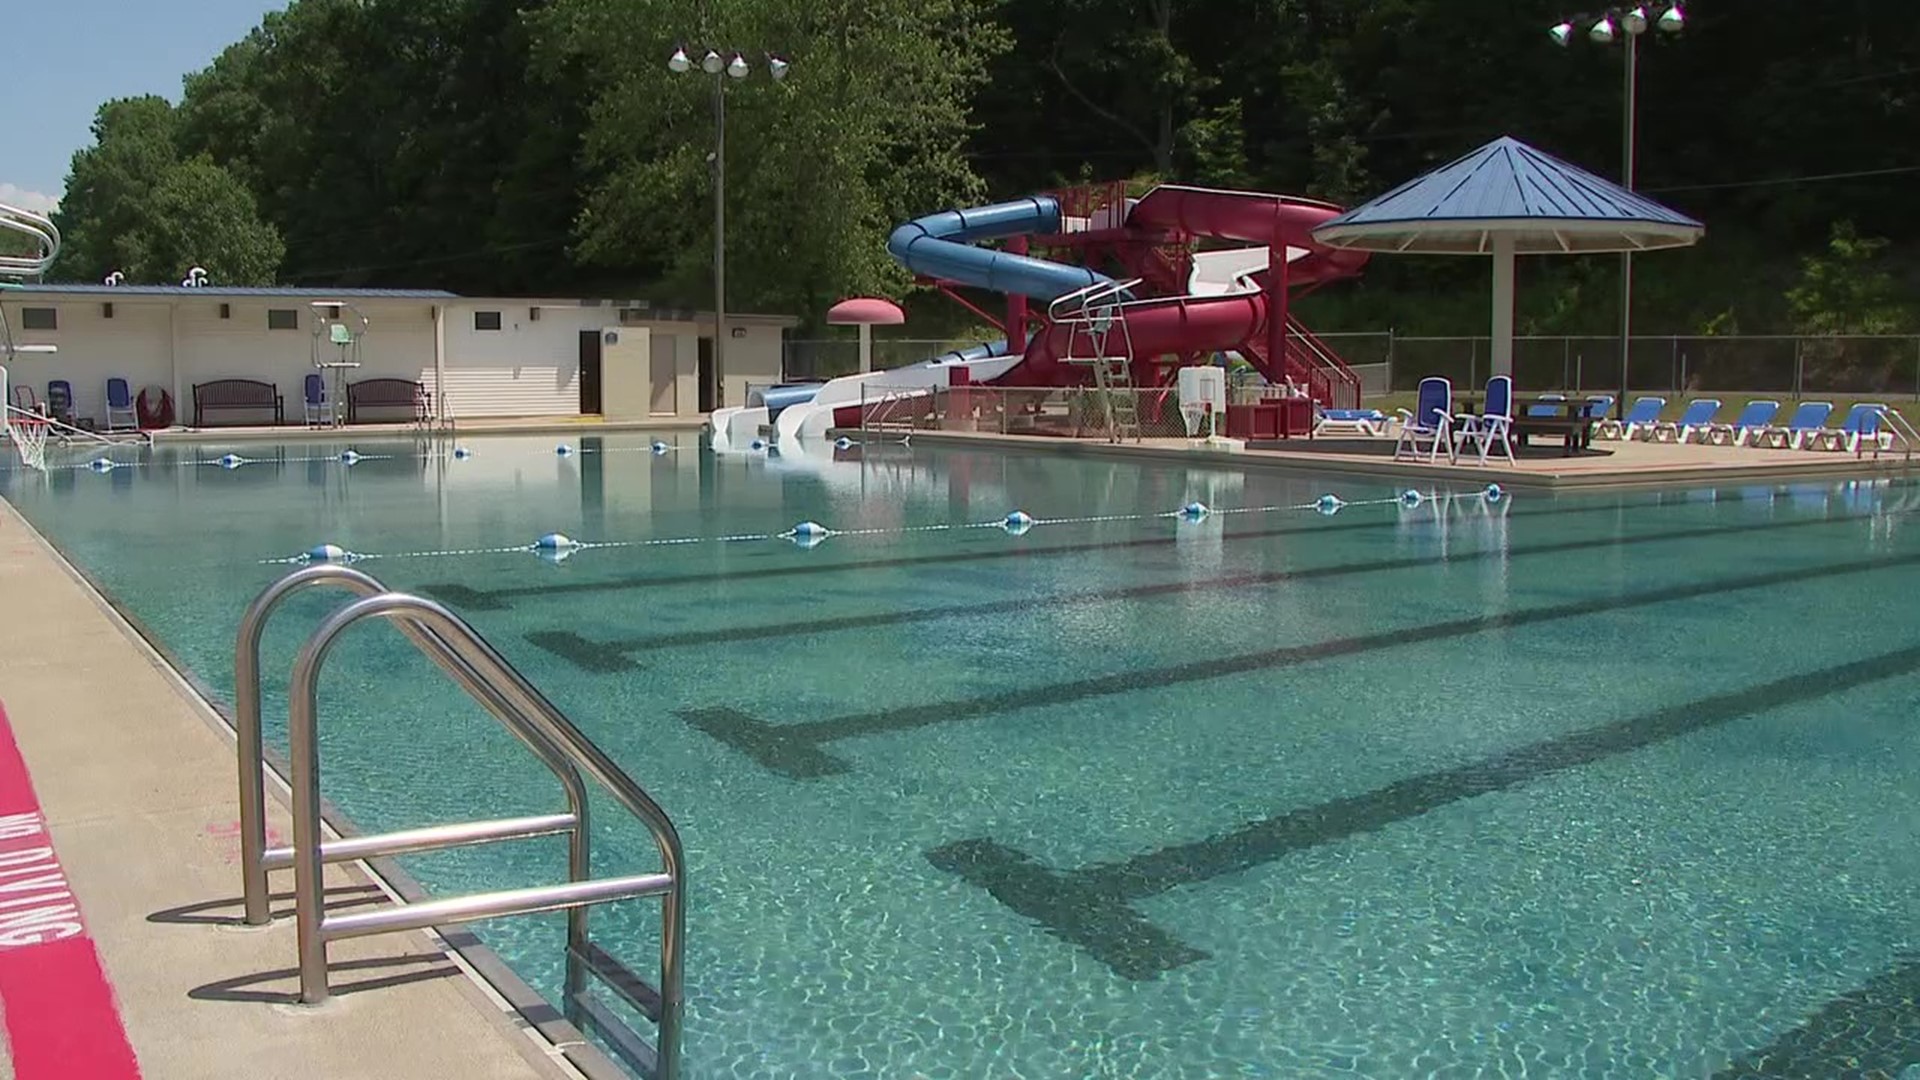 This year, officials in Sunbury and Milton teamed up to make sure more children have the chance to swim.